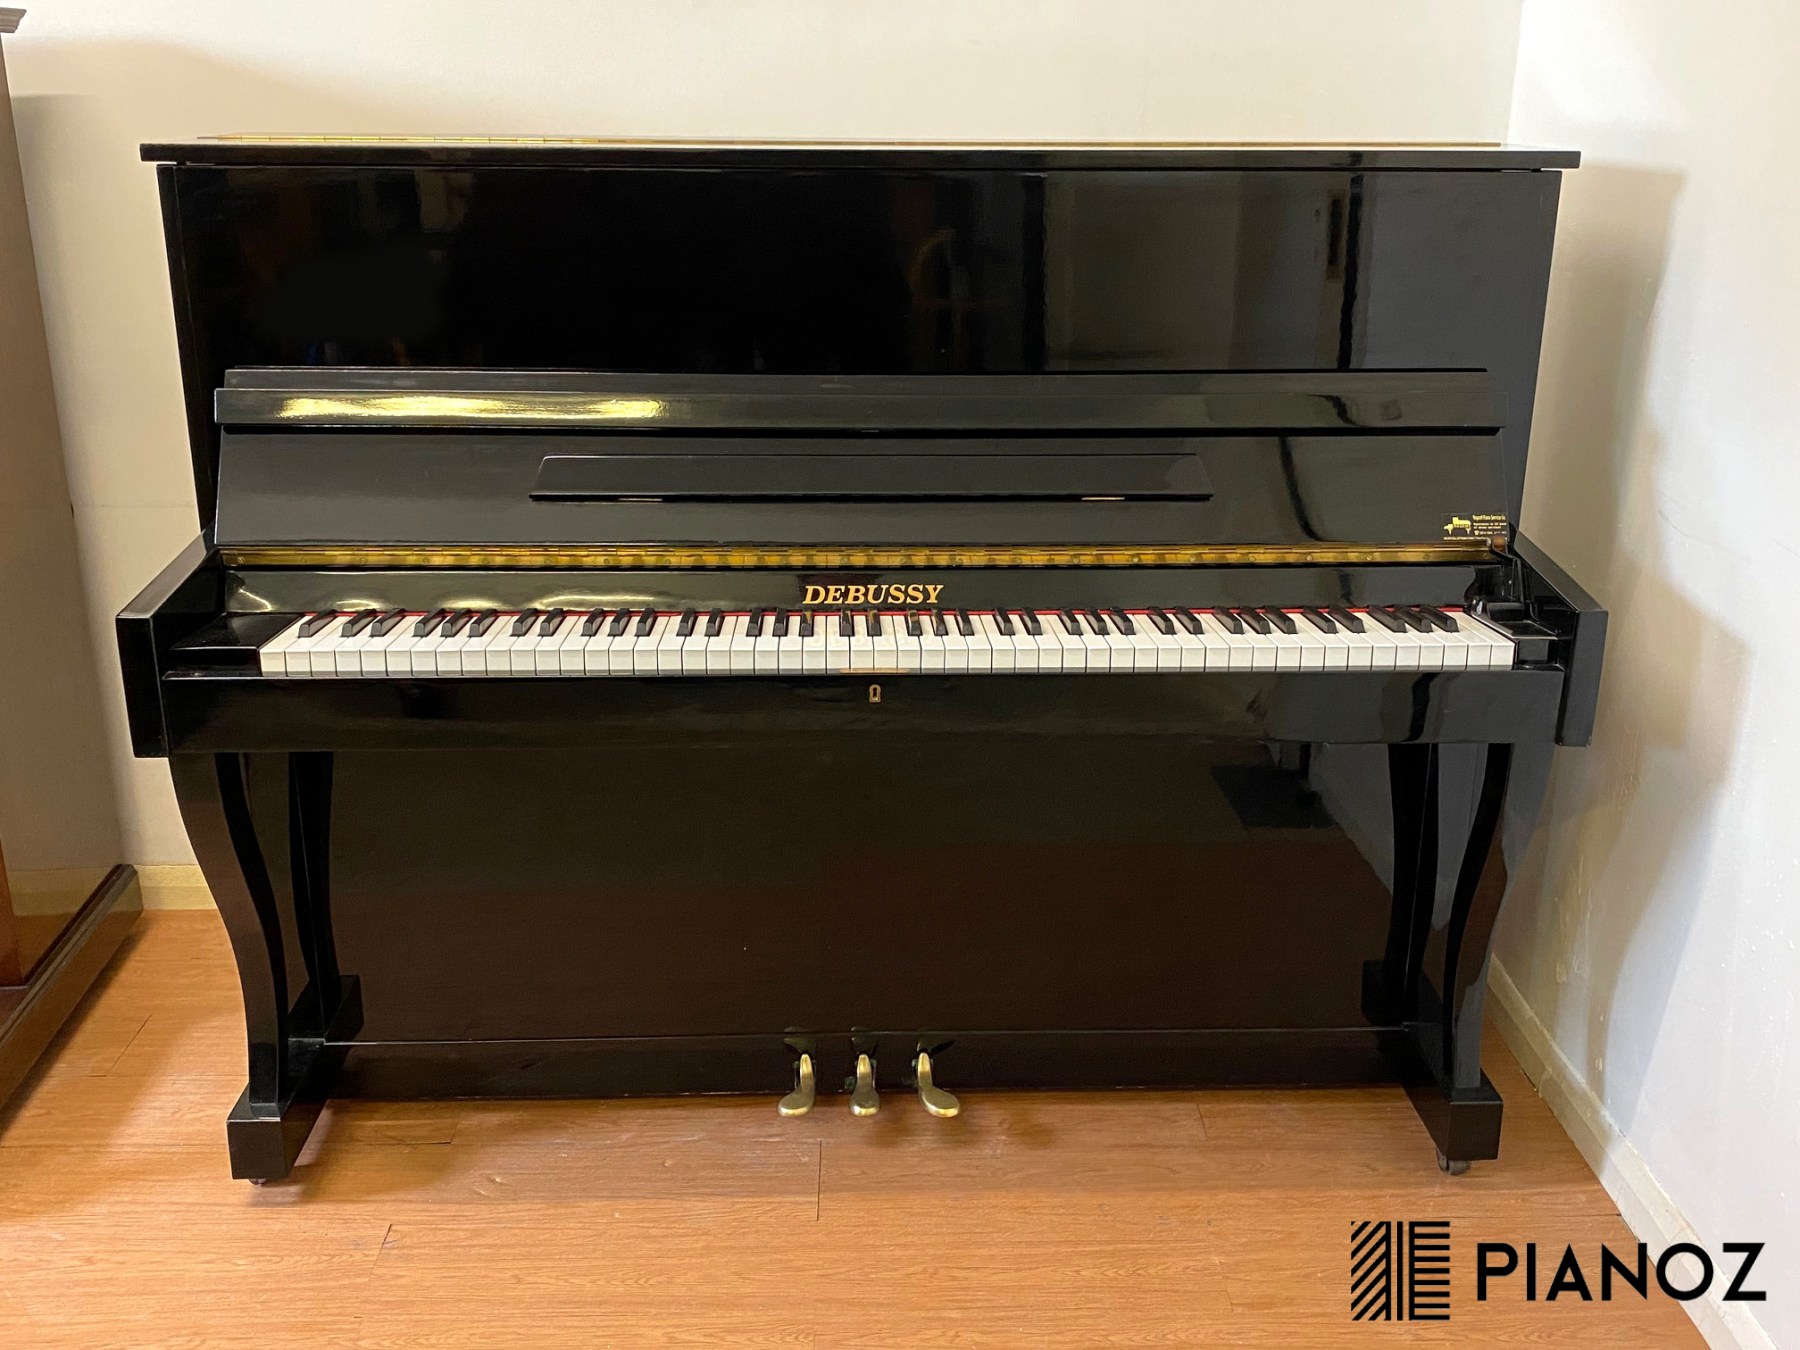 Debussy 110 Upright Piano piano for sale in UK